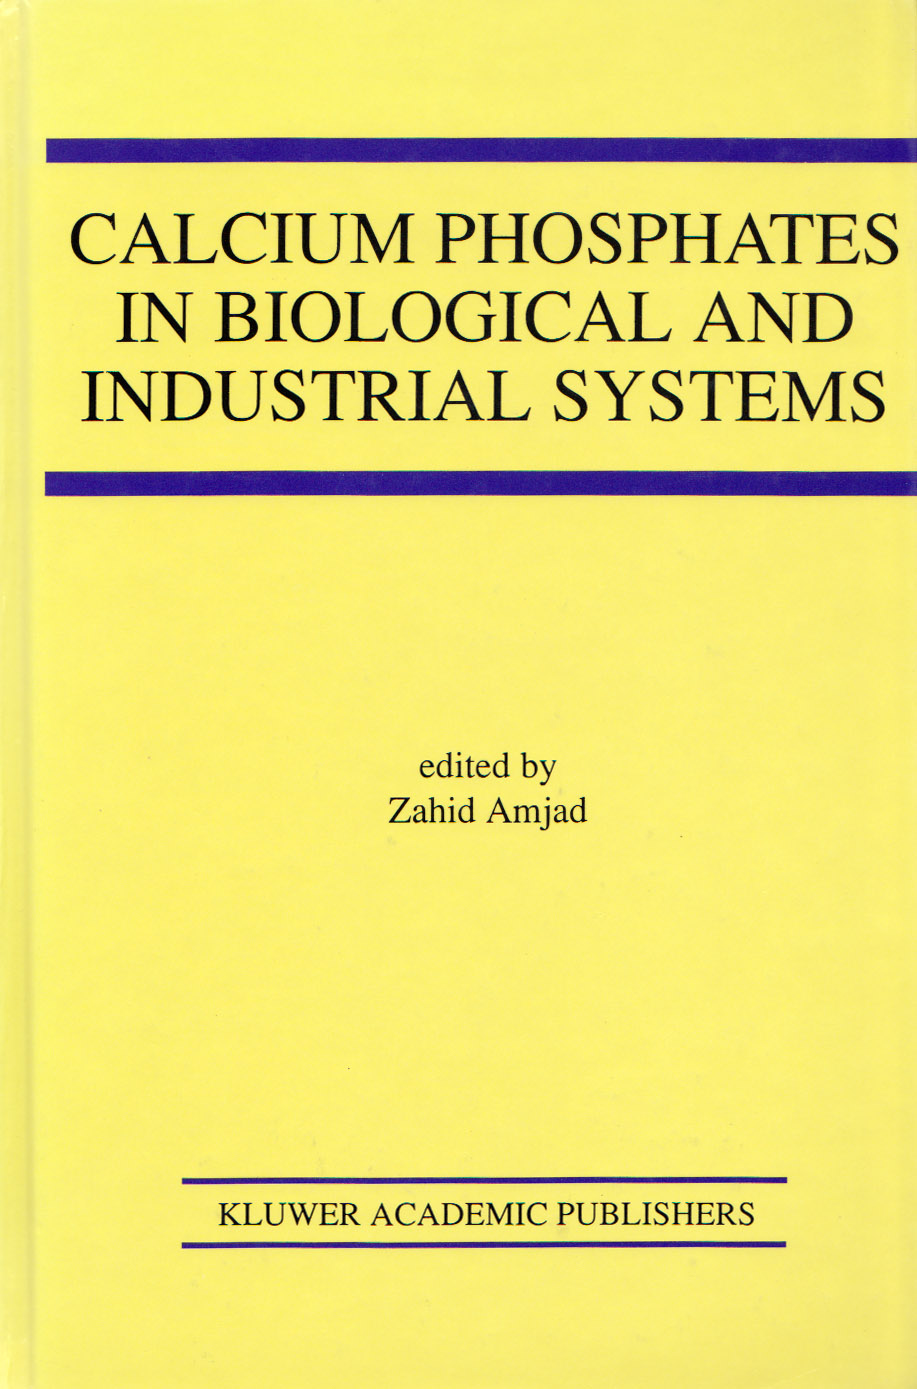 Calcium Phosphates in Industrial, Environmental and Biological Systems